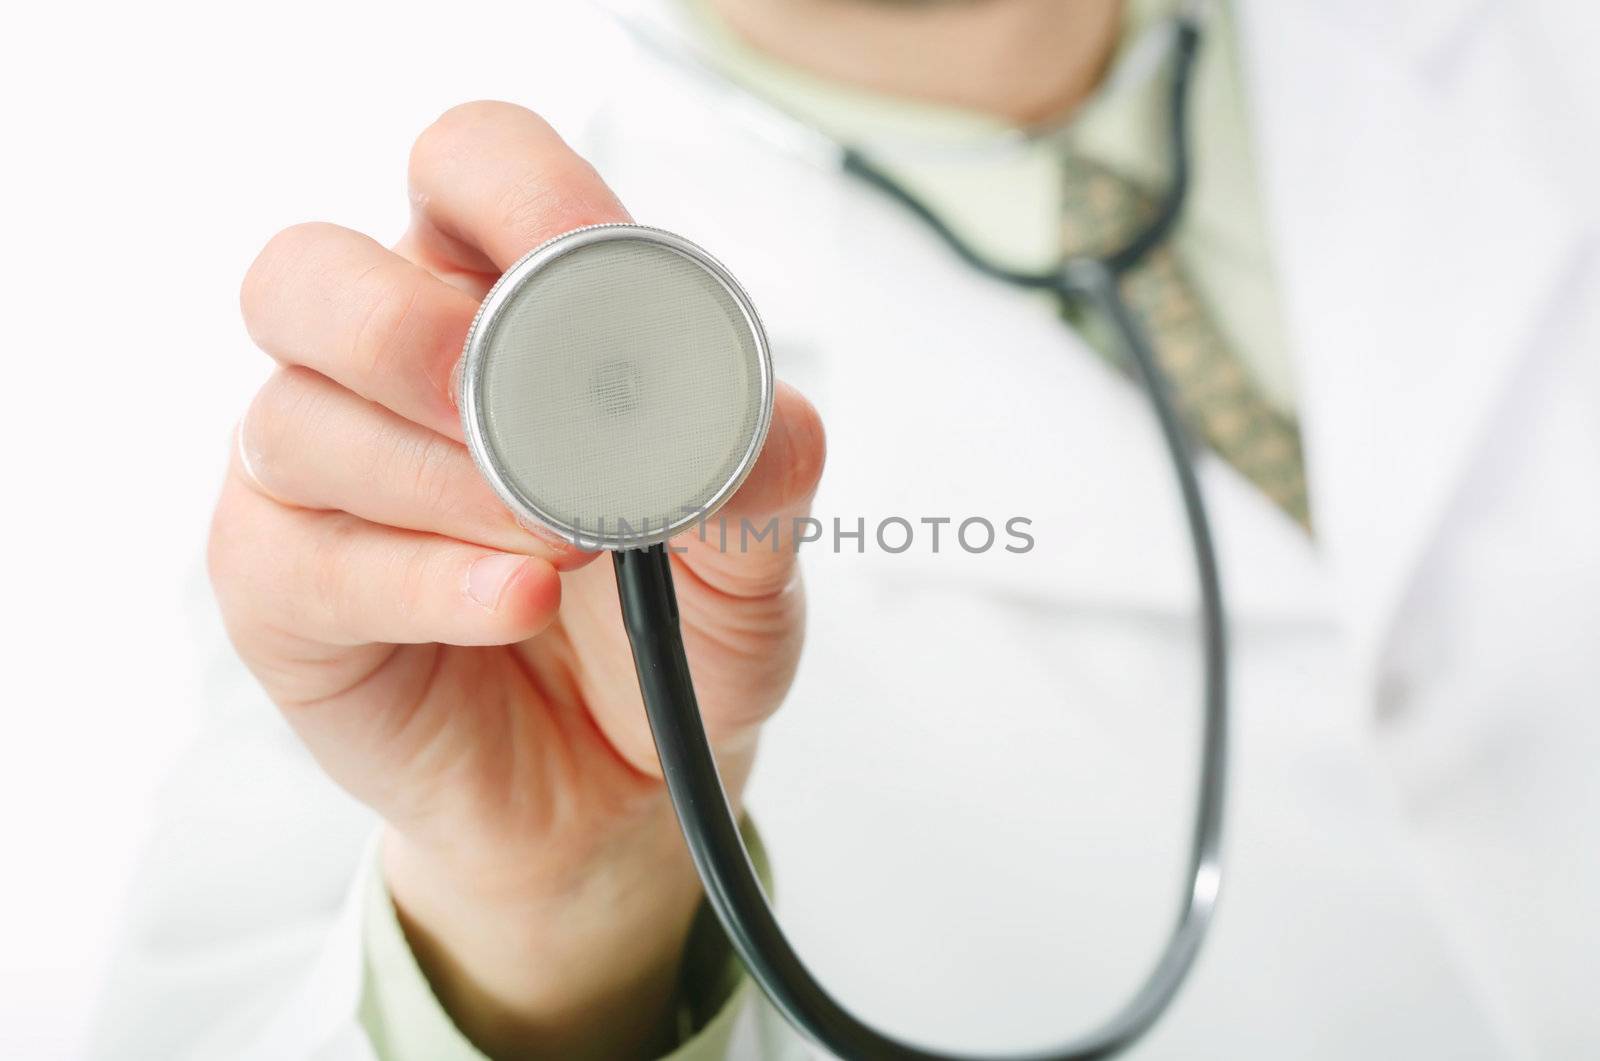 An image of a stethoscope in doctor's hand